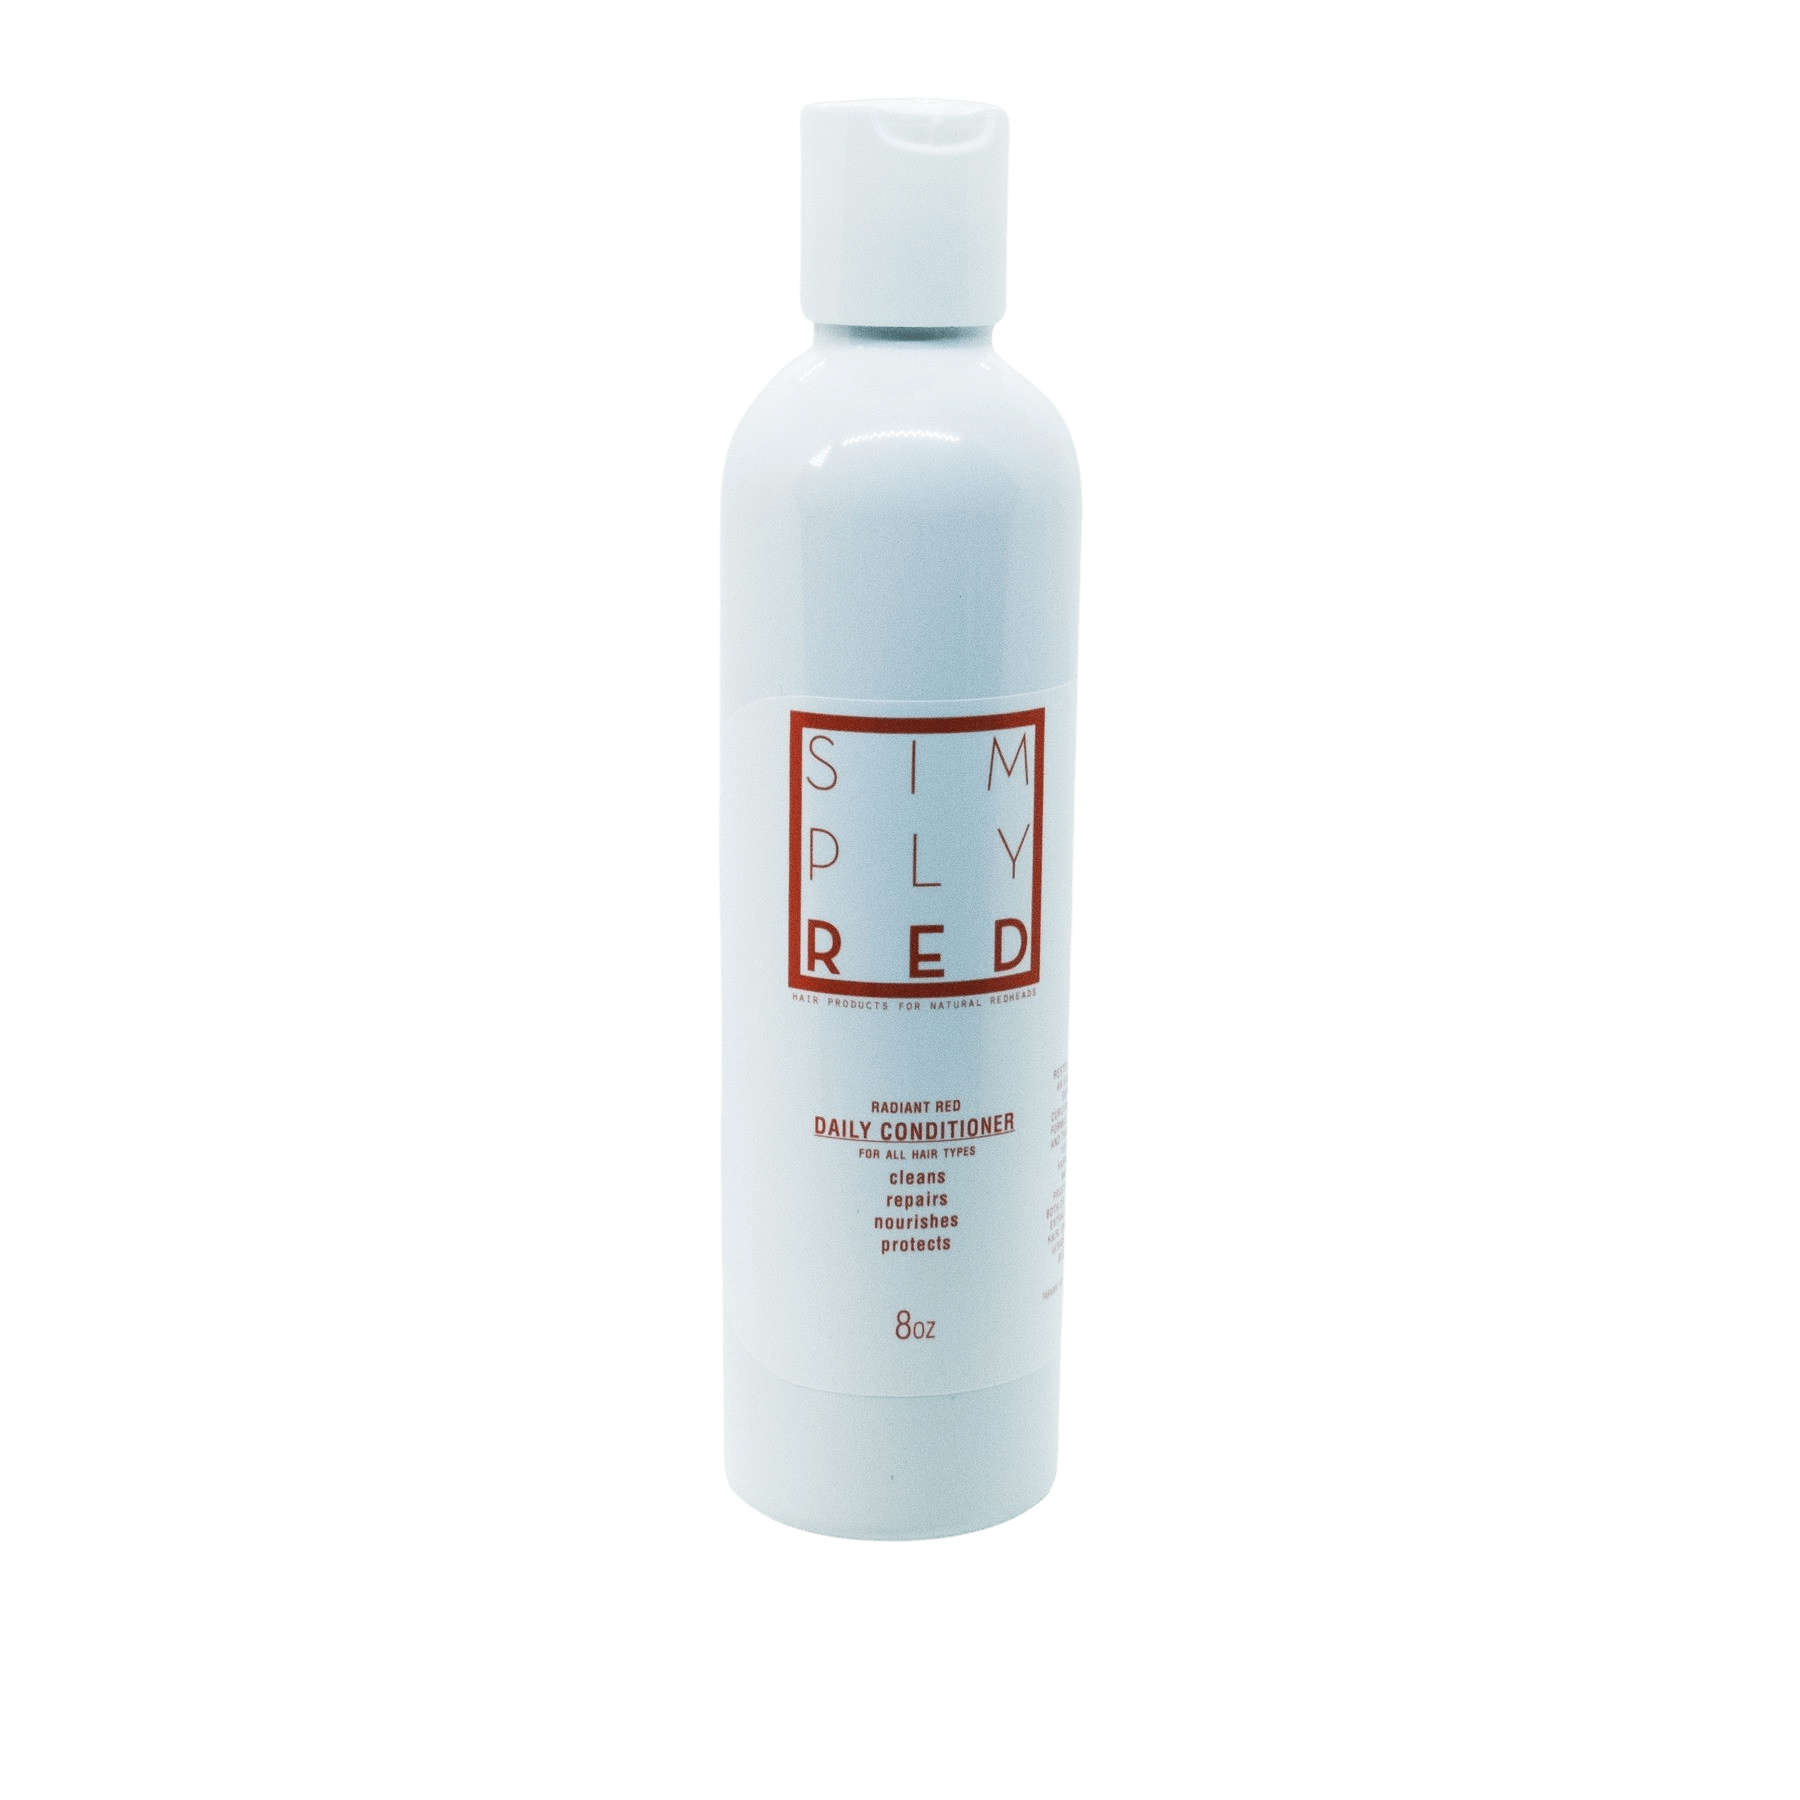 Simply Red conditioner